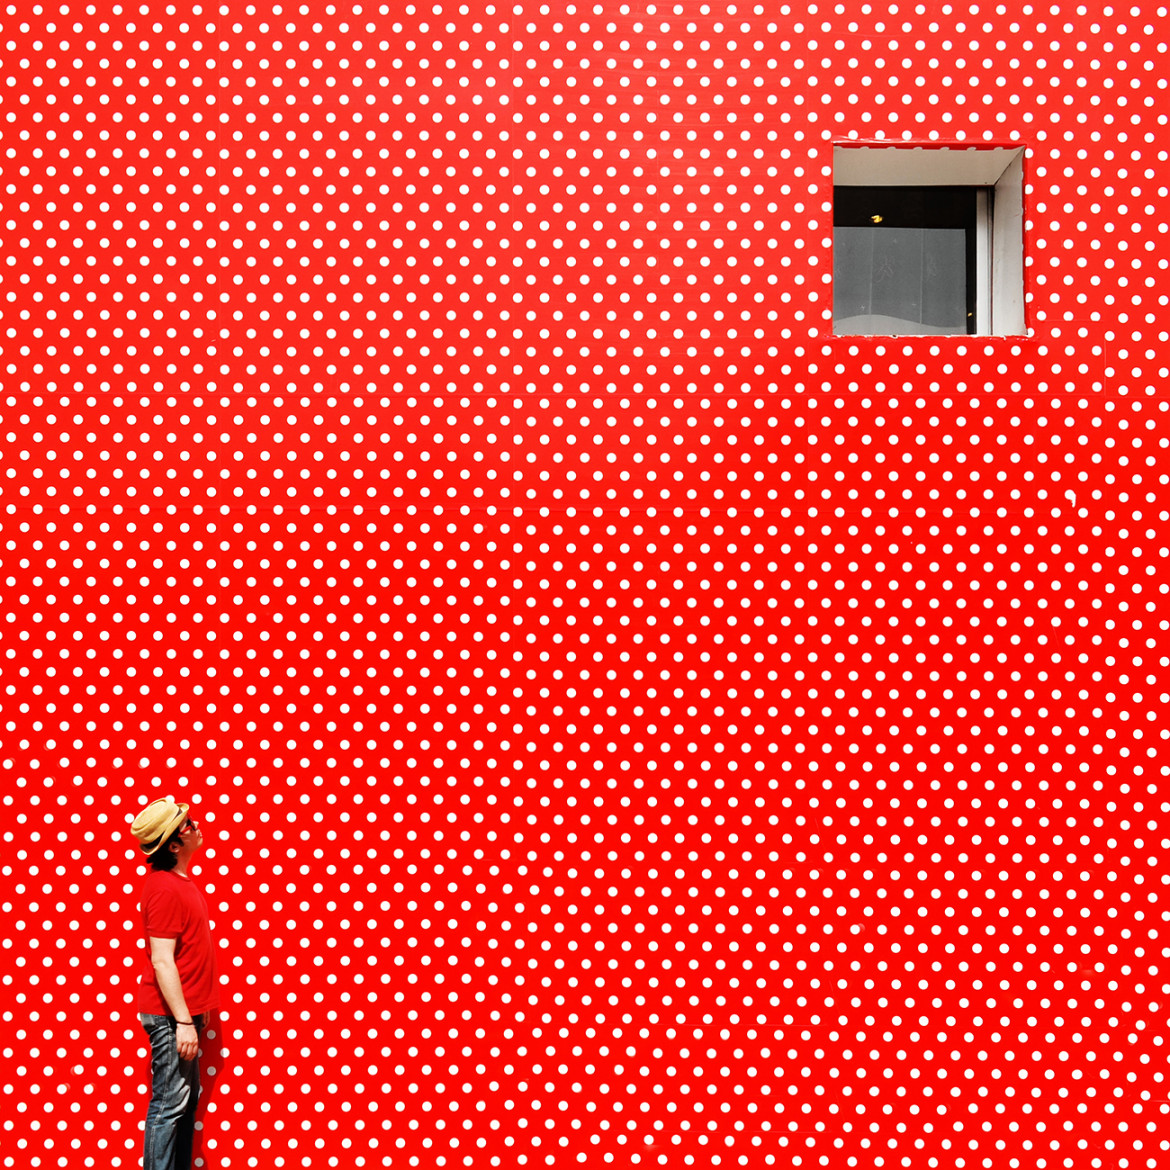 fot. Yener Torun, Never Give In Never Give Up